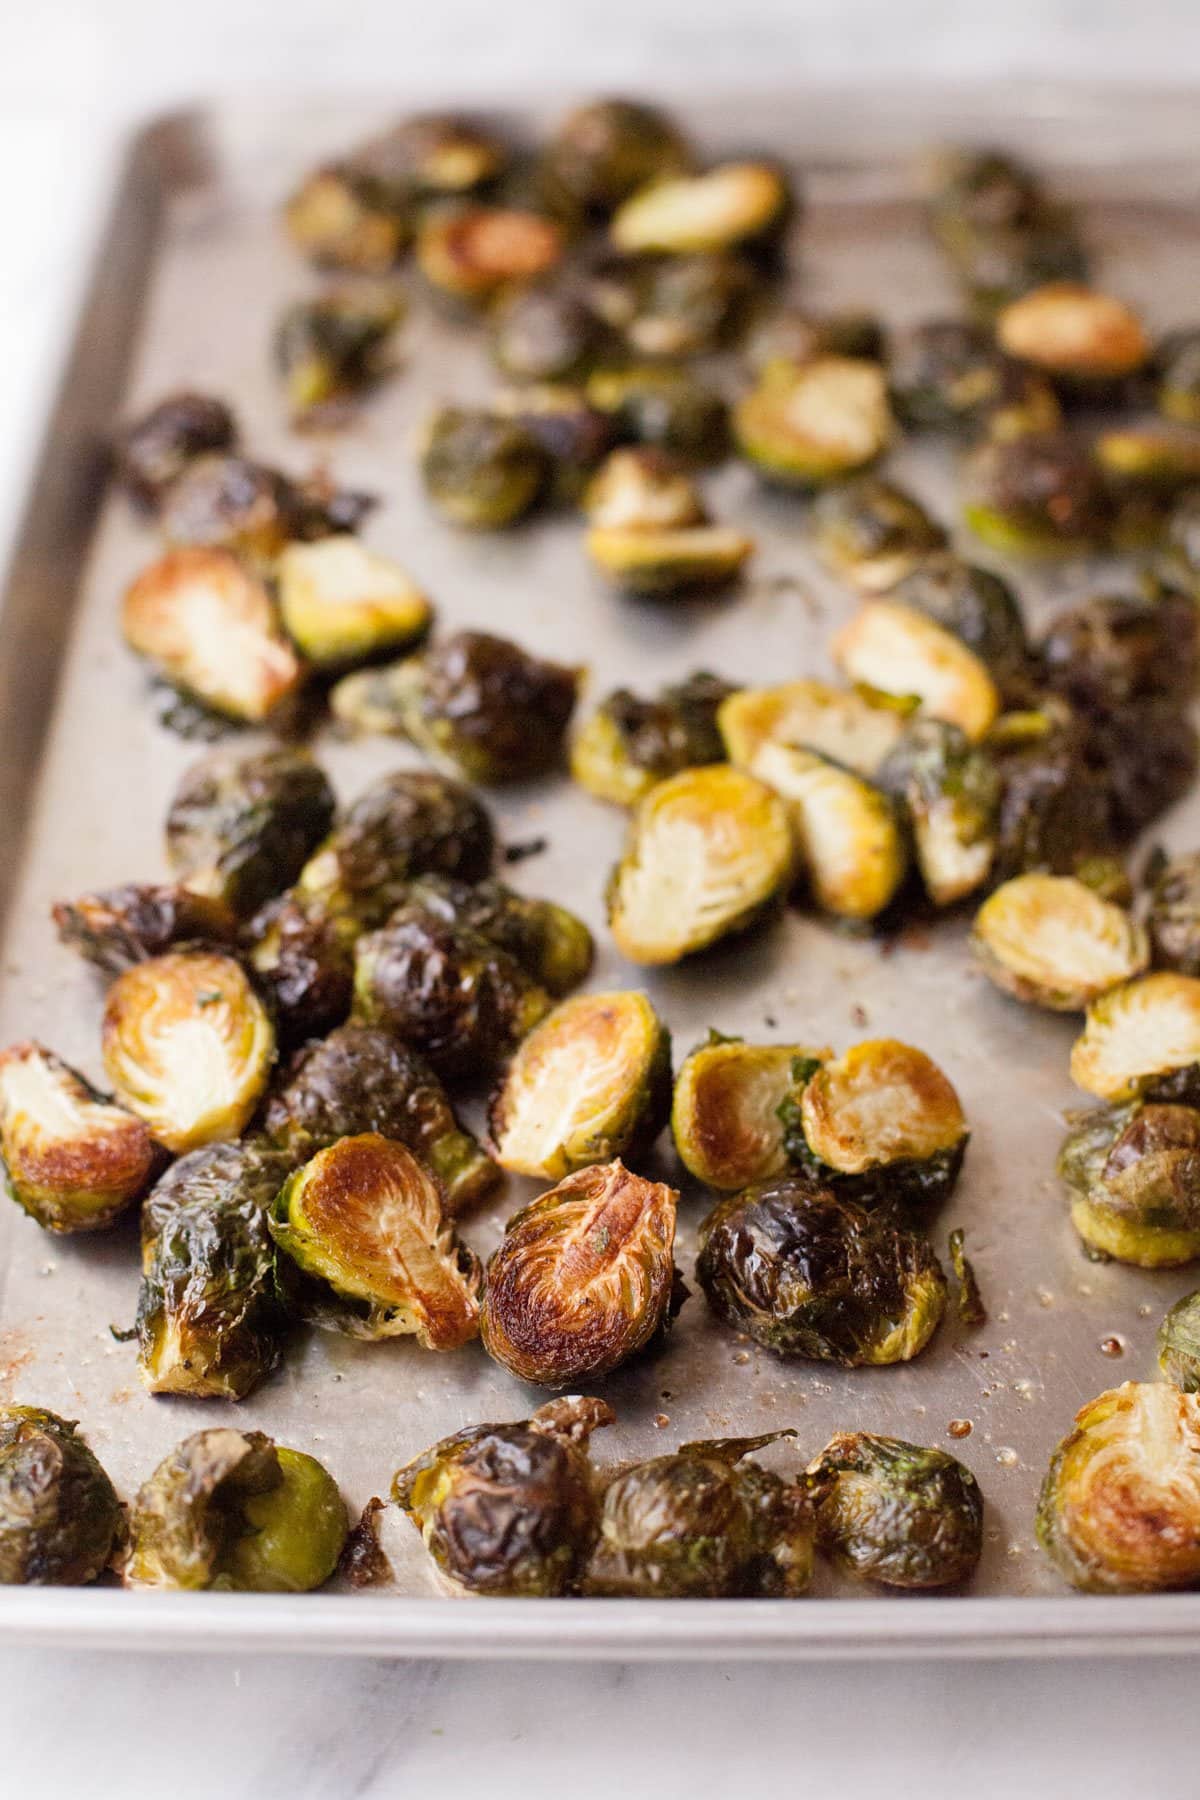 How to Make Perfectly Roasted Brussel Sprouts